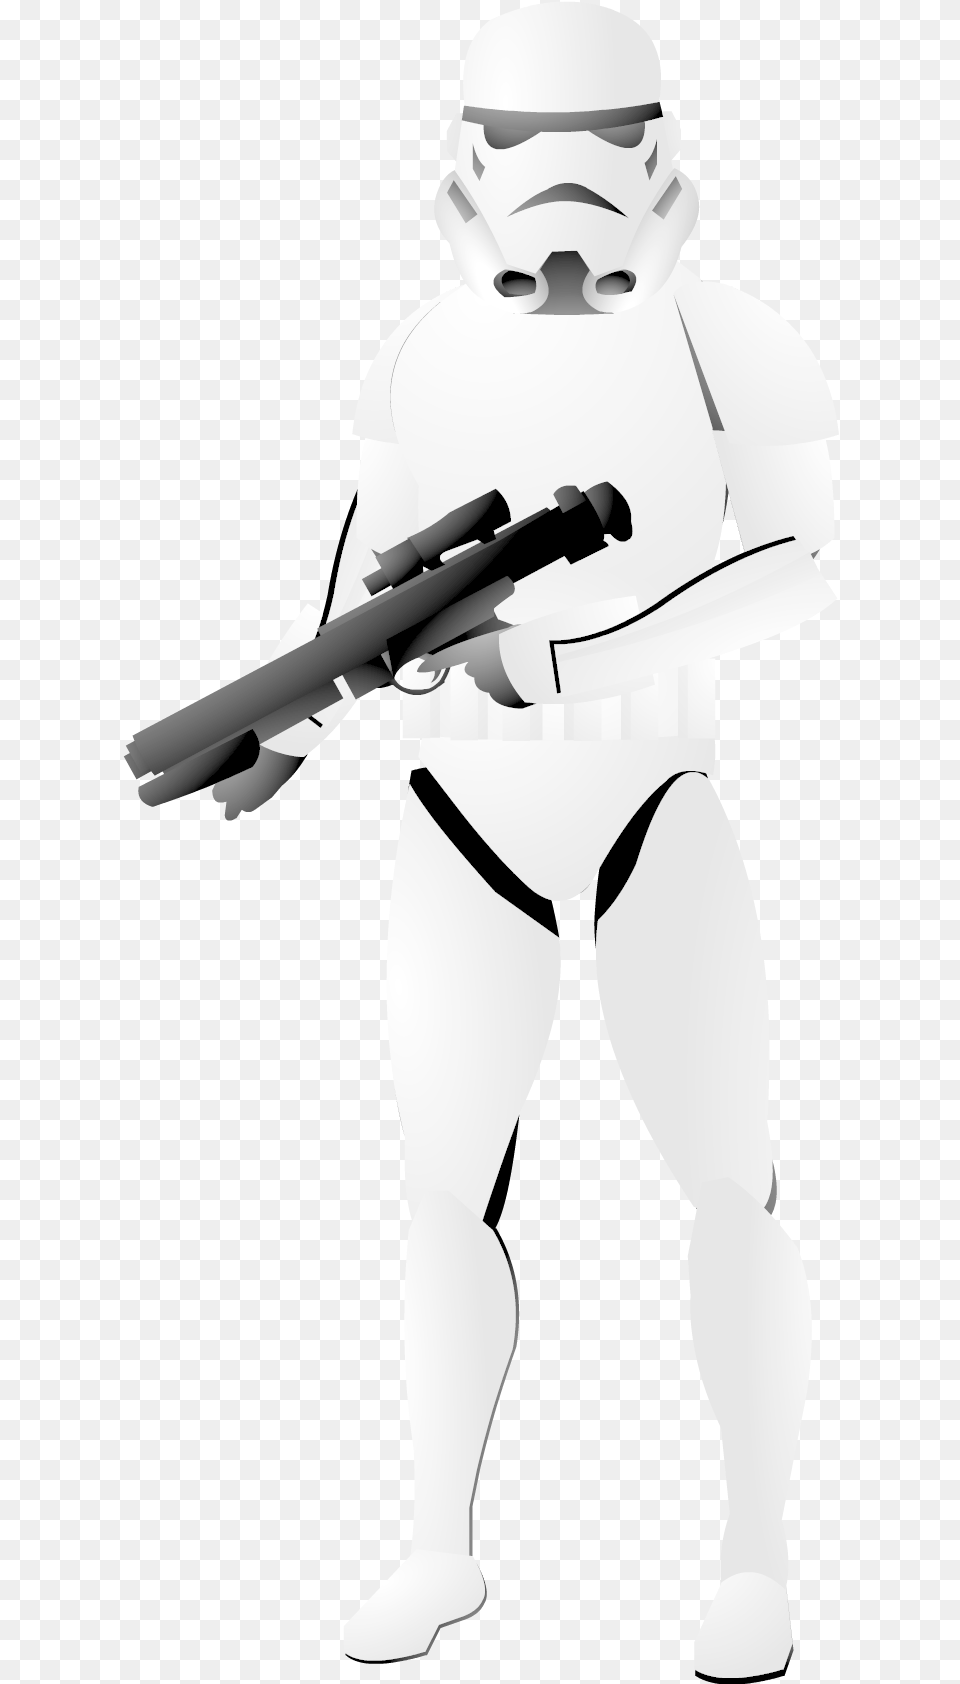 Stormtrooper Images Download Stormtrooper Pose, Baby, People, Person, Firearm Png Image